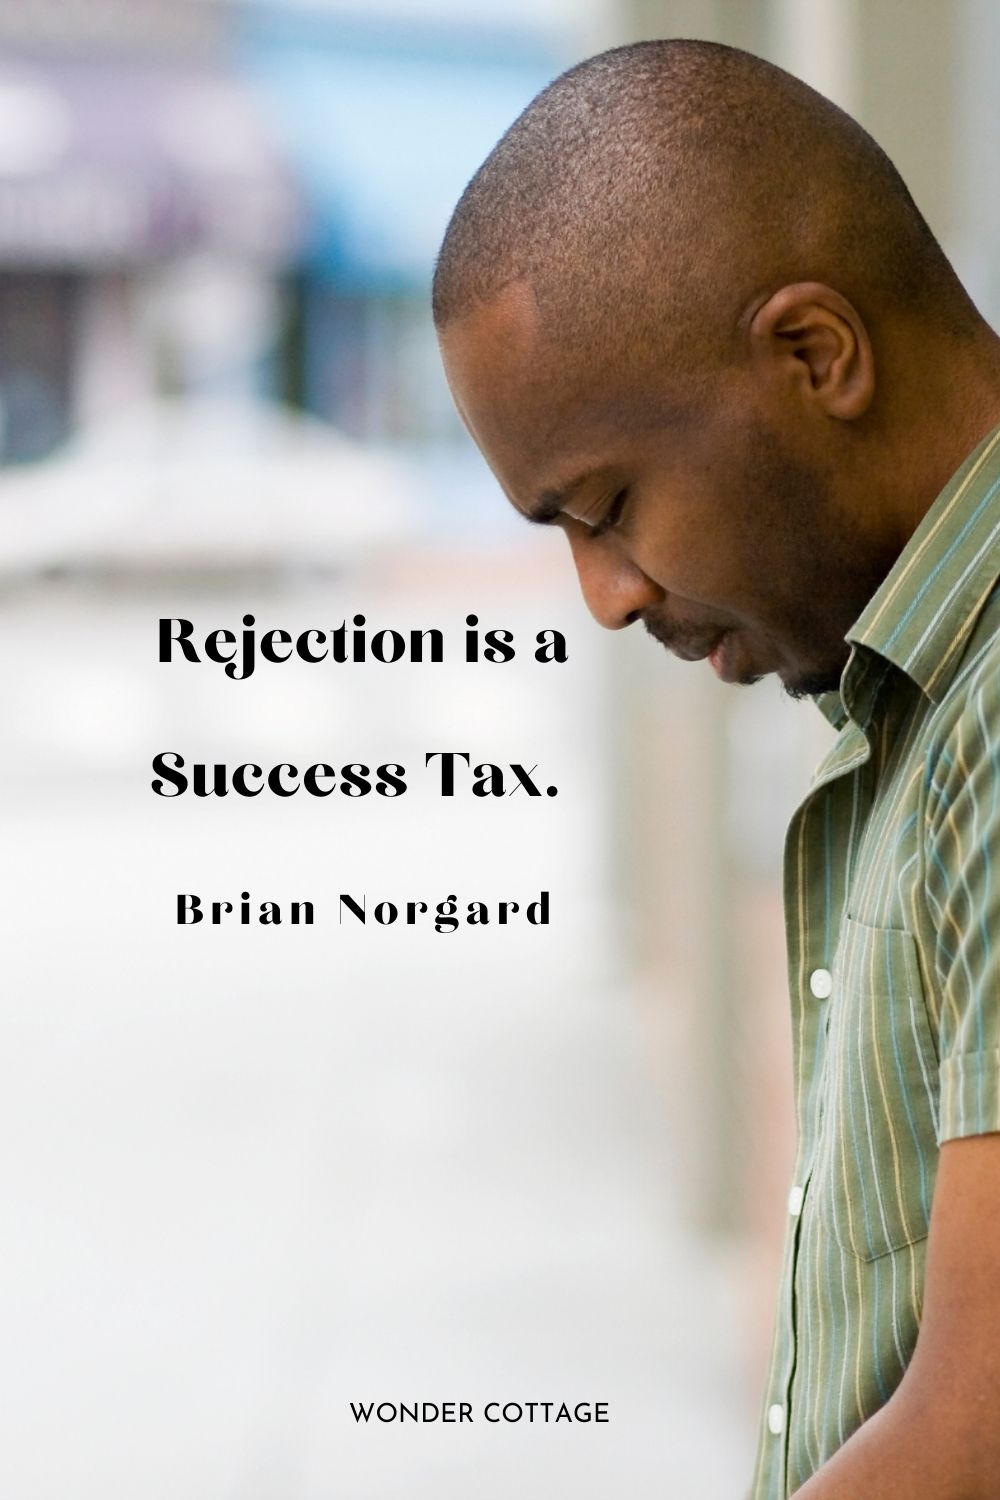 Rejection is a success tax.  Brian Norgard